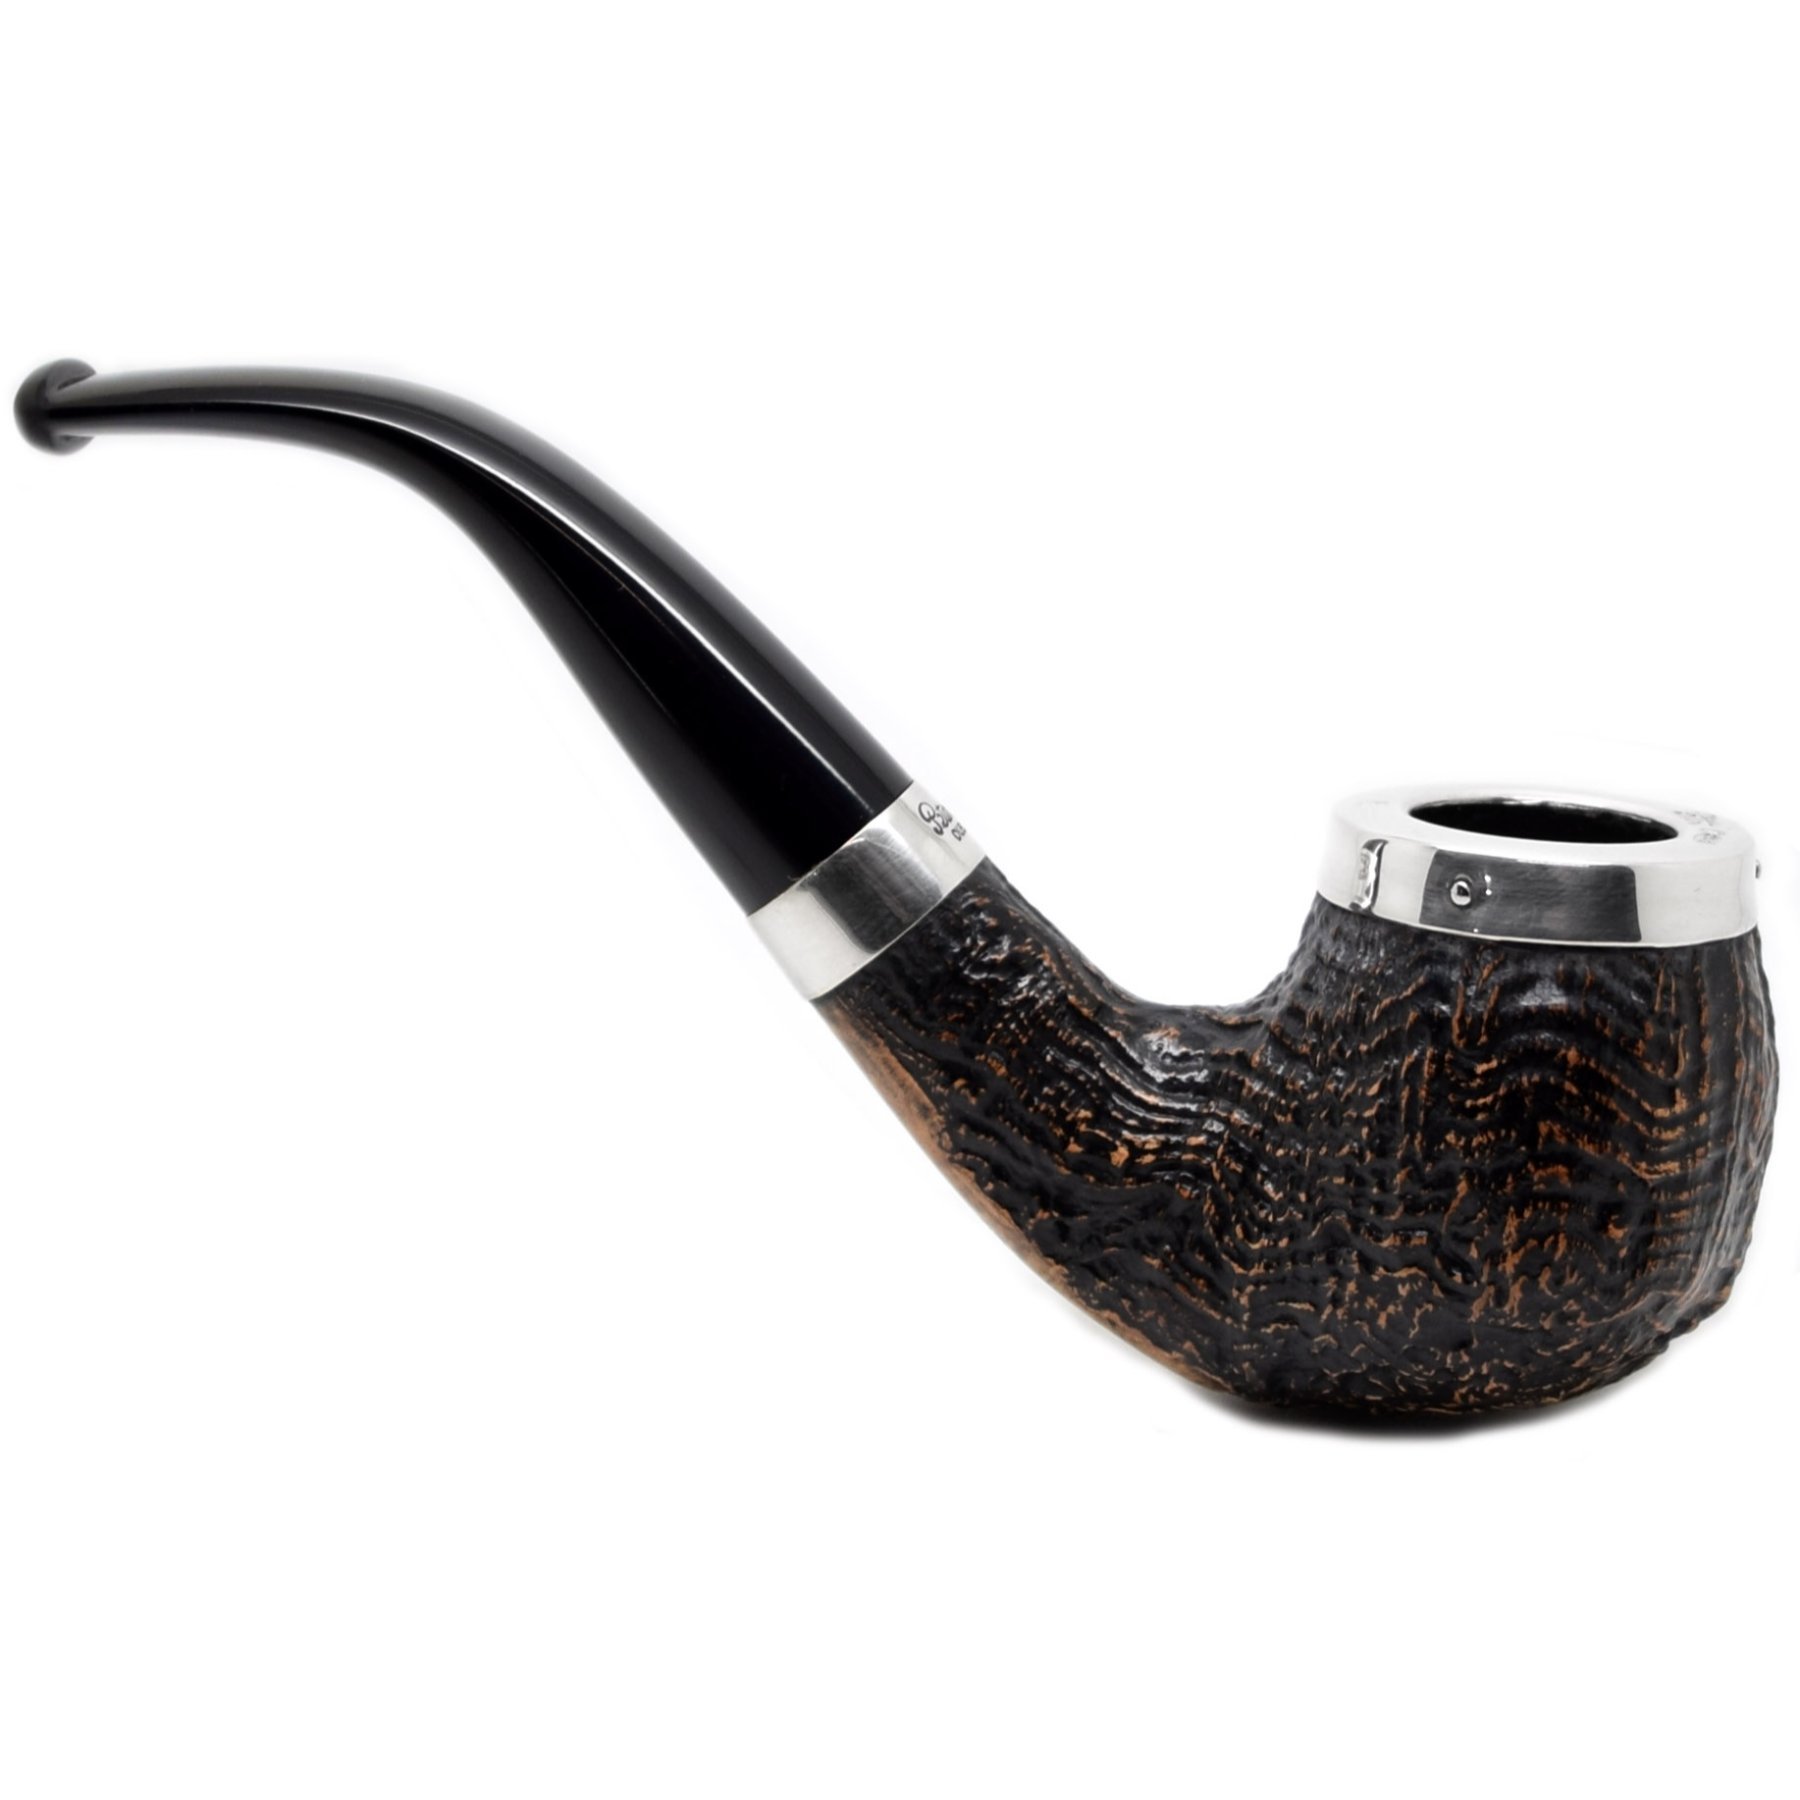 Peterson Specials & Limited Editions — Harrison & Simmonds